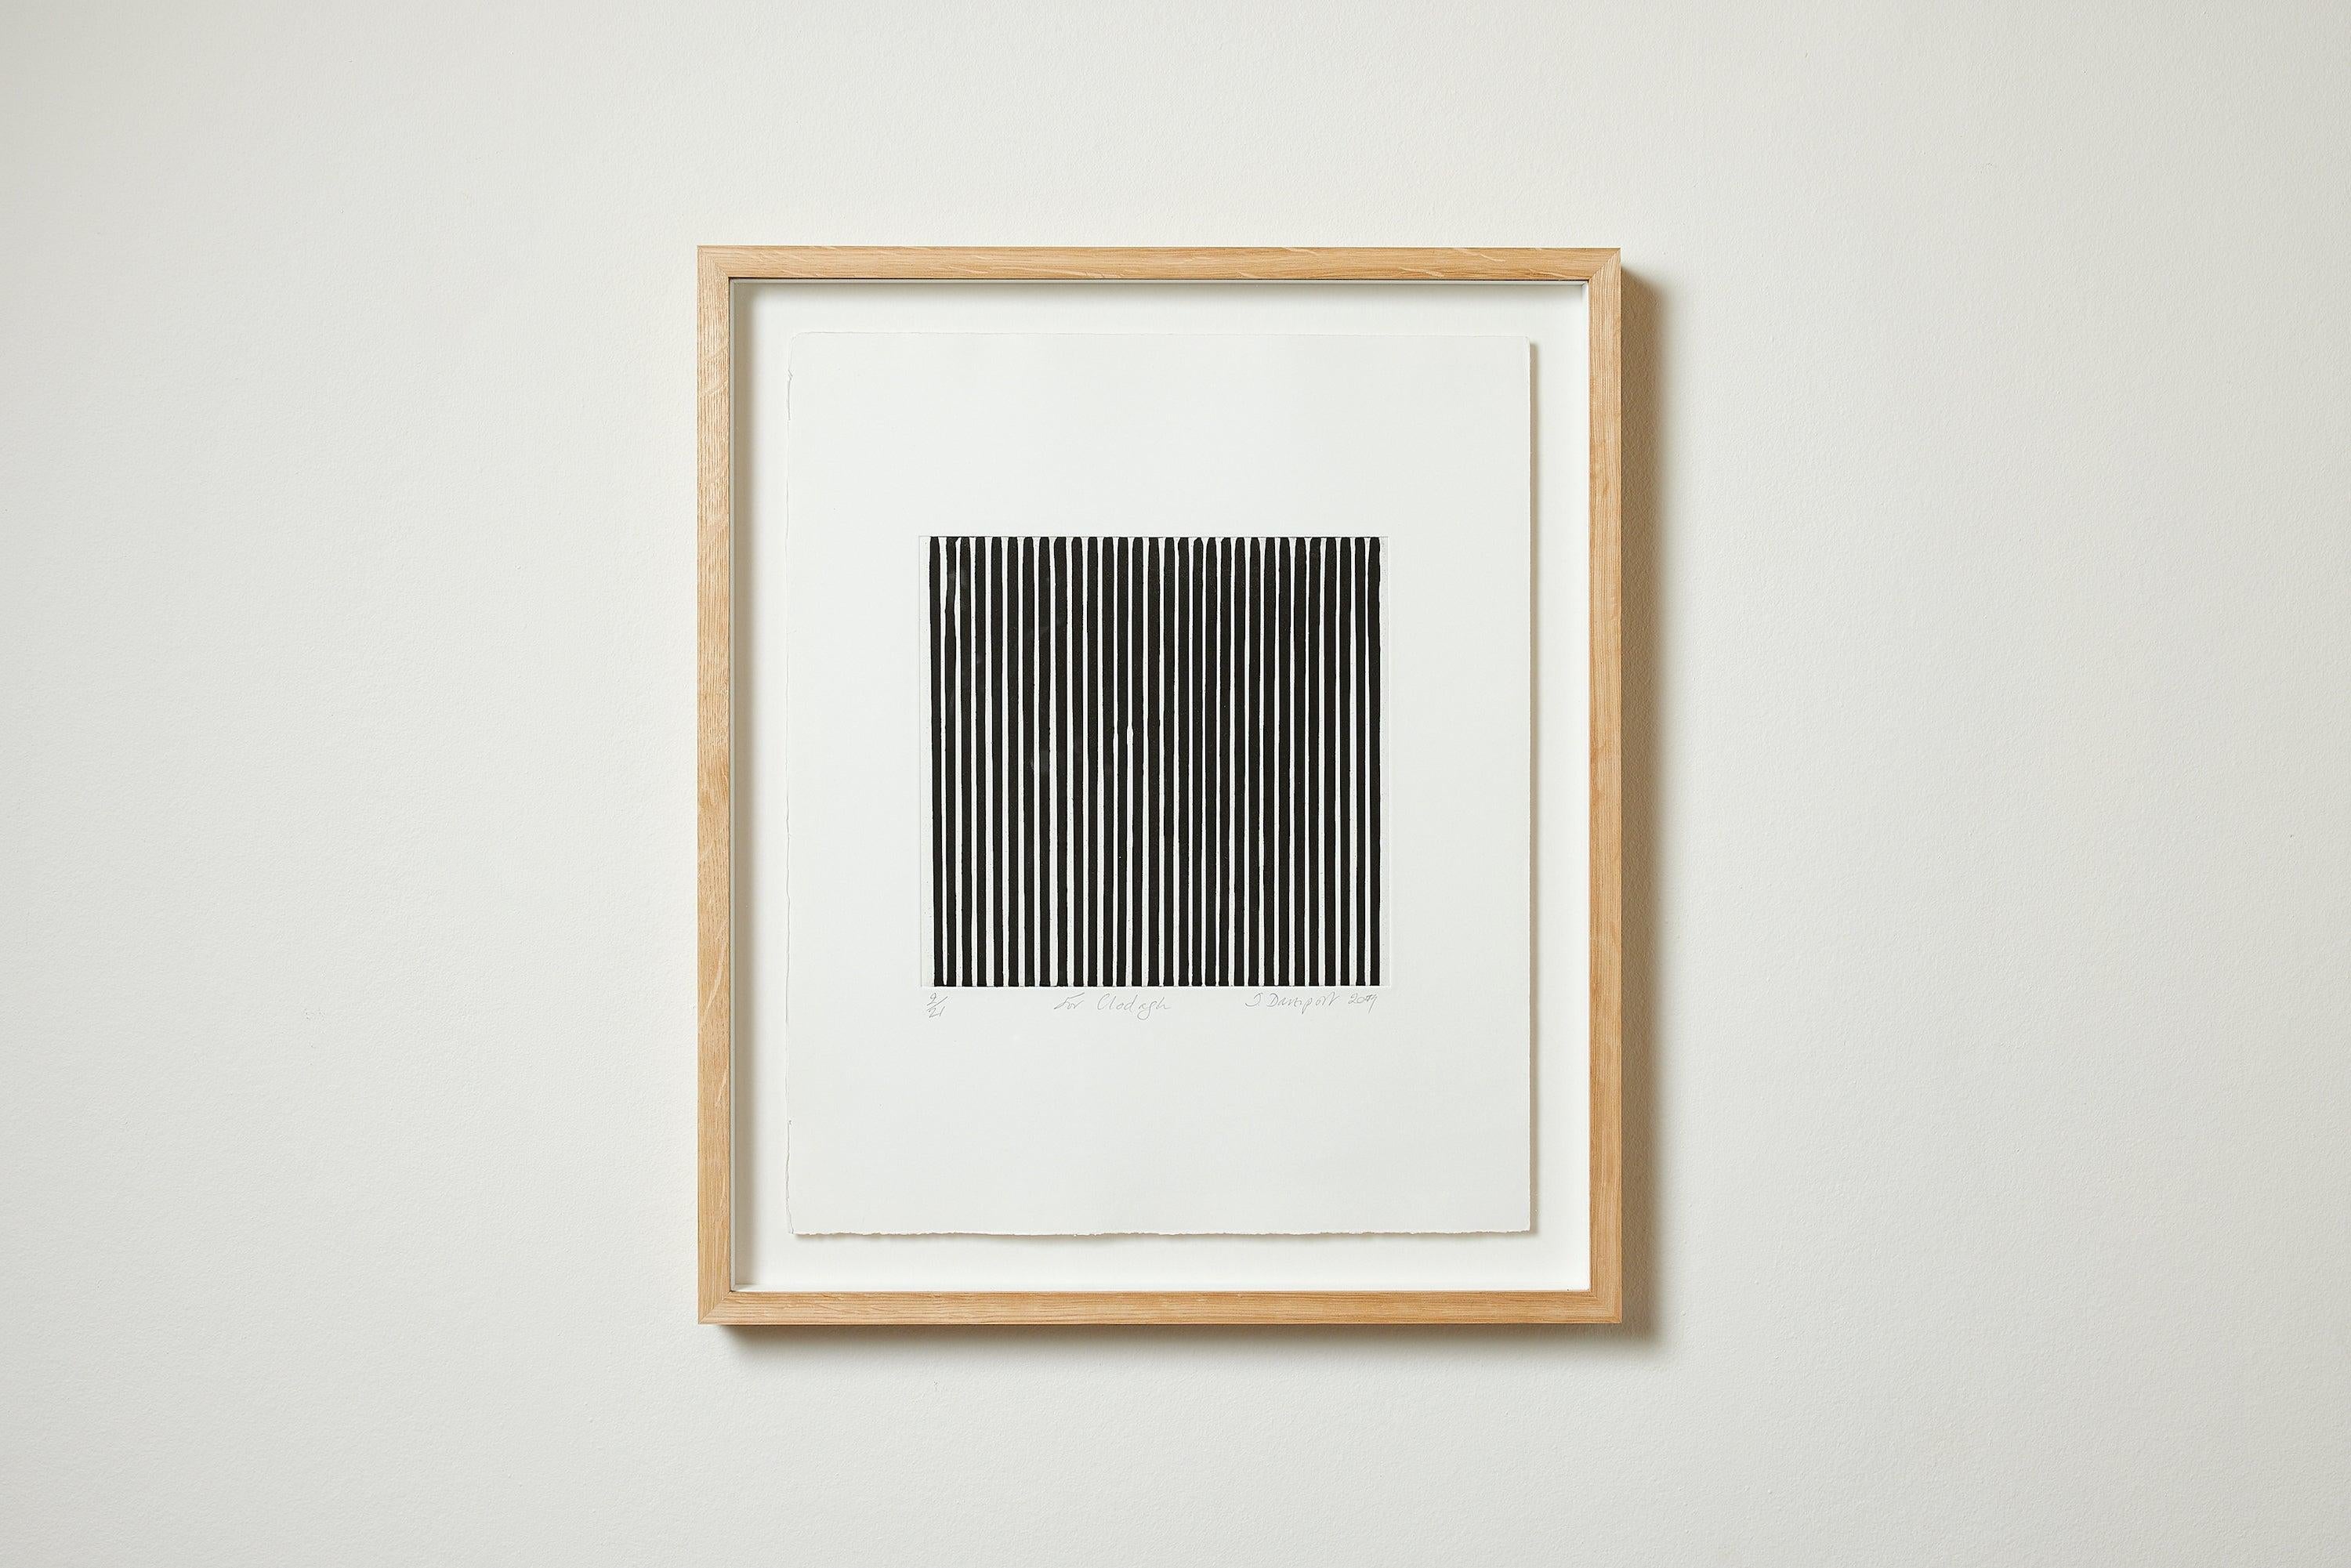 Untitled, 2009
Ian Davenport

Etching with aquatint, on wove
Signed, dated, numbered and inscribed ‘For Clodagh' 
From the edition of 21
Printed by Thumbprint Editions, London
Published by Waddington Galleries, London
Sheet: 43.4 × 35.5 cm (17.1 ×